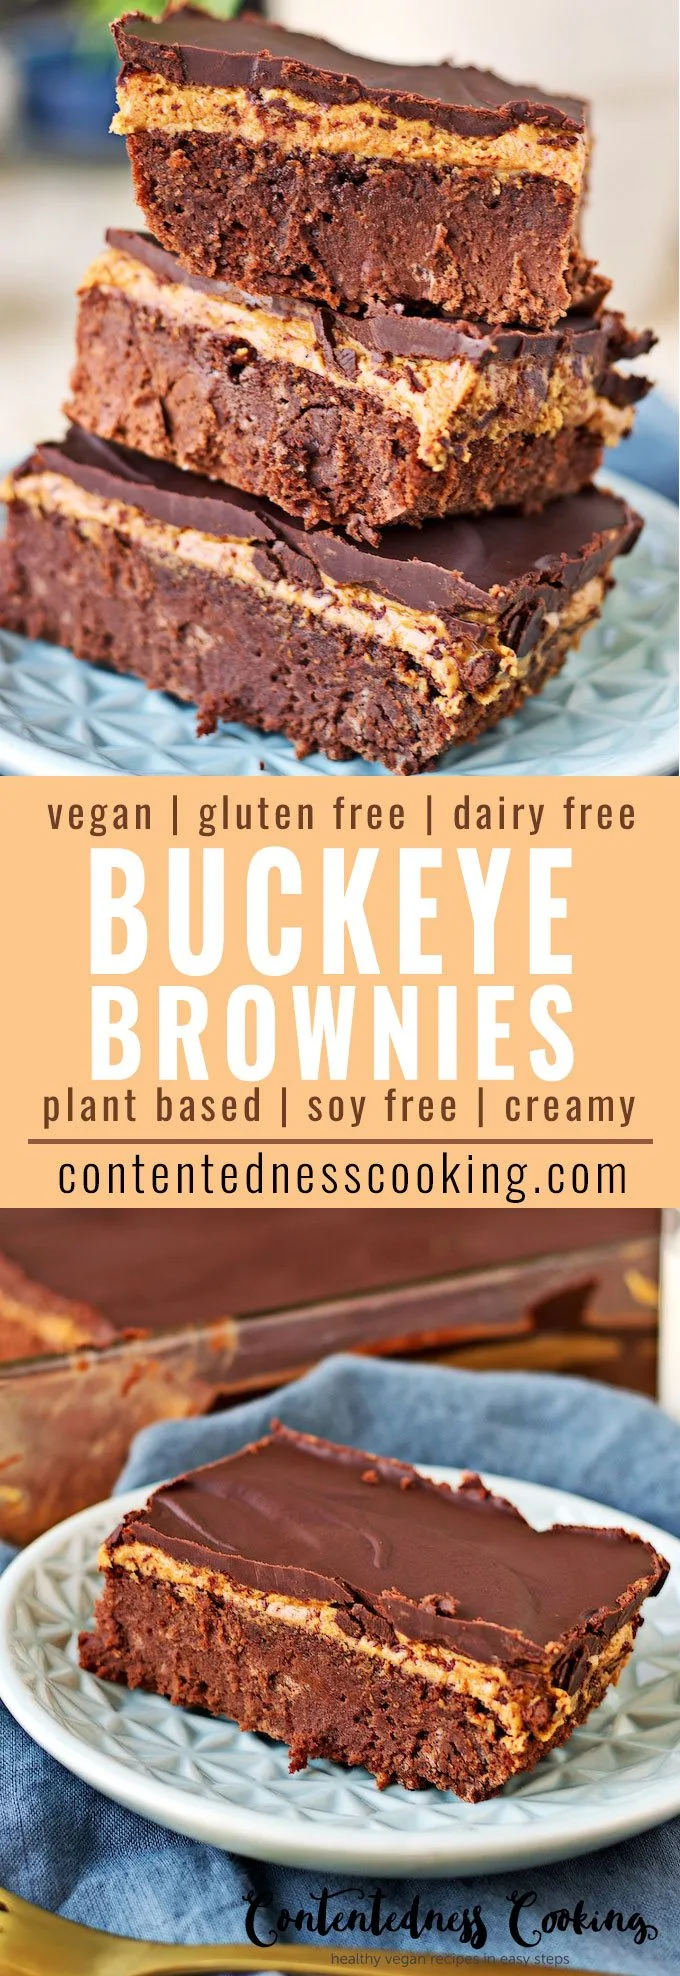 Collage of two pictures of the Vegan Buckeye Brownies with recipe title text.